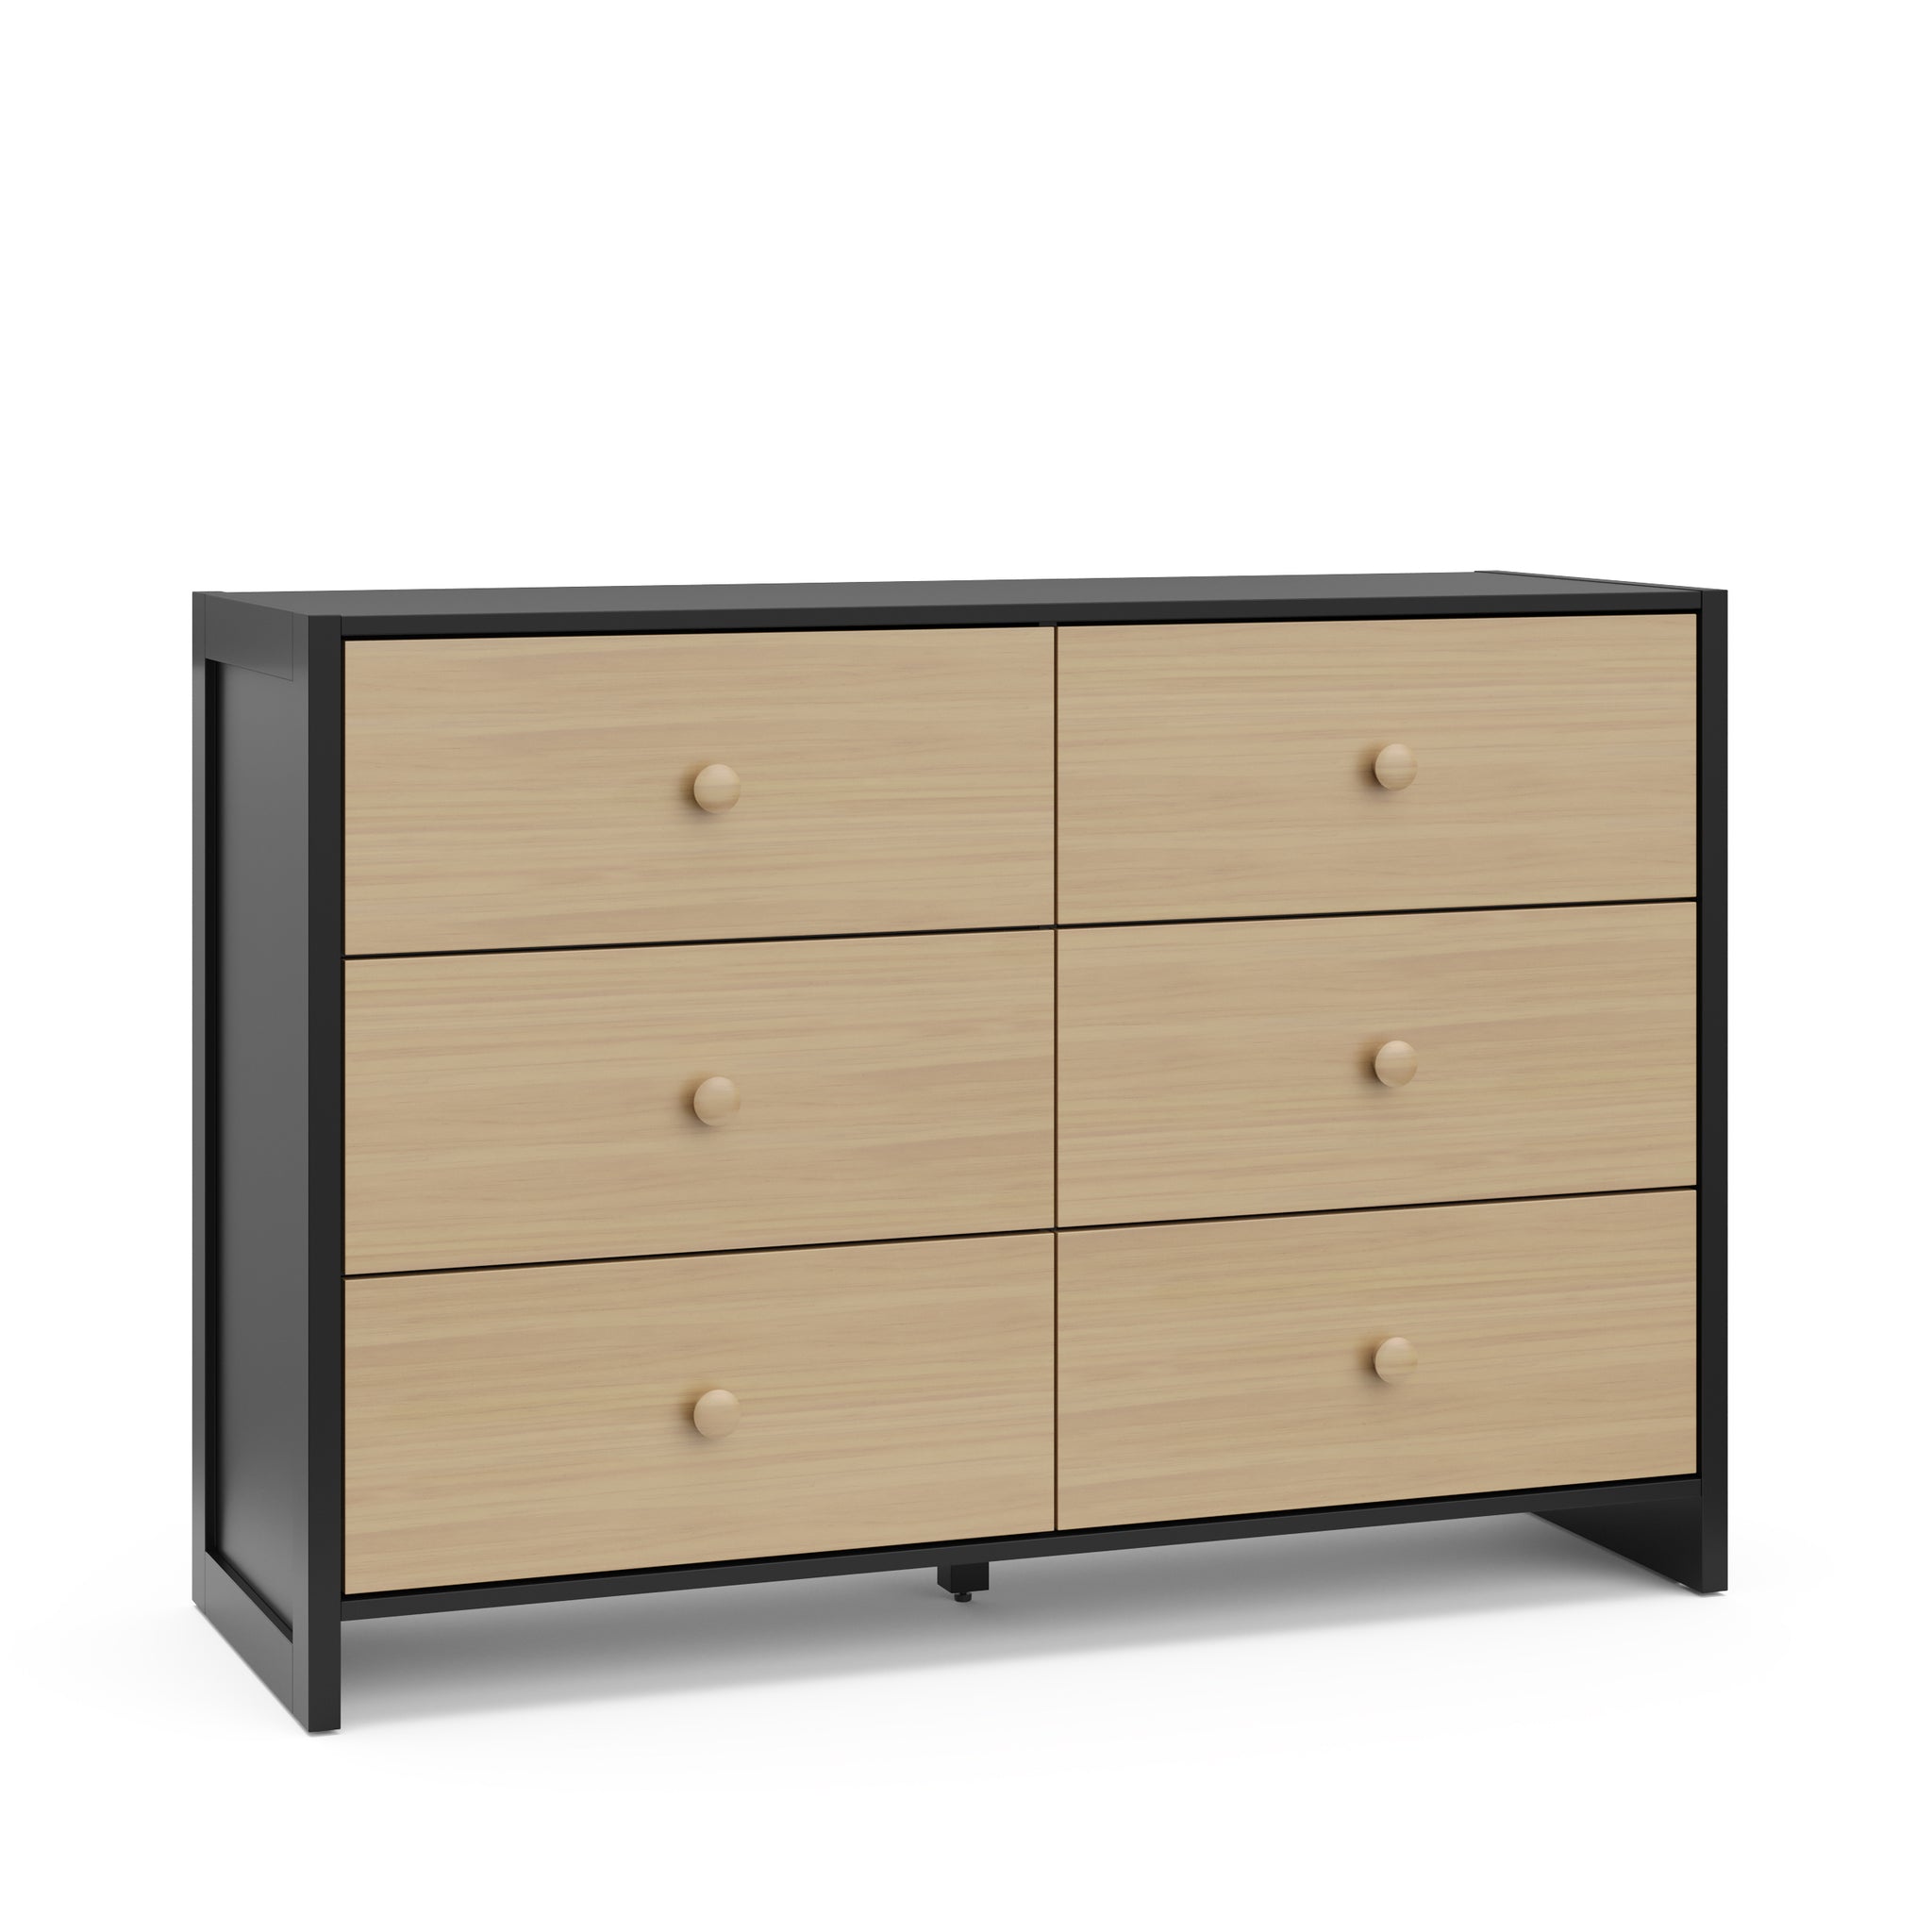 Angled view of a black with driftwood dresser with 6 drawers